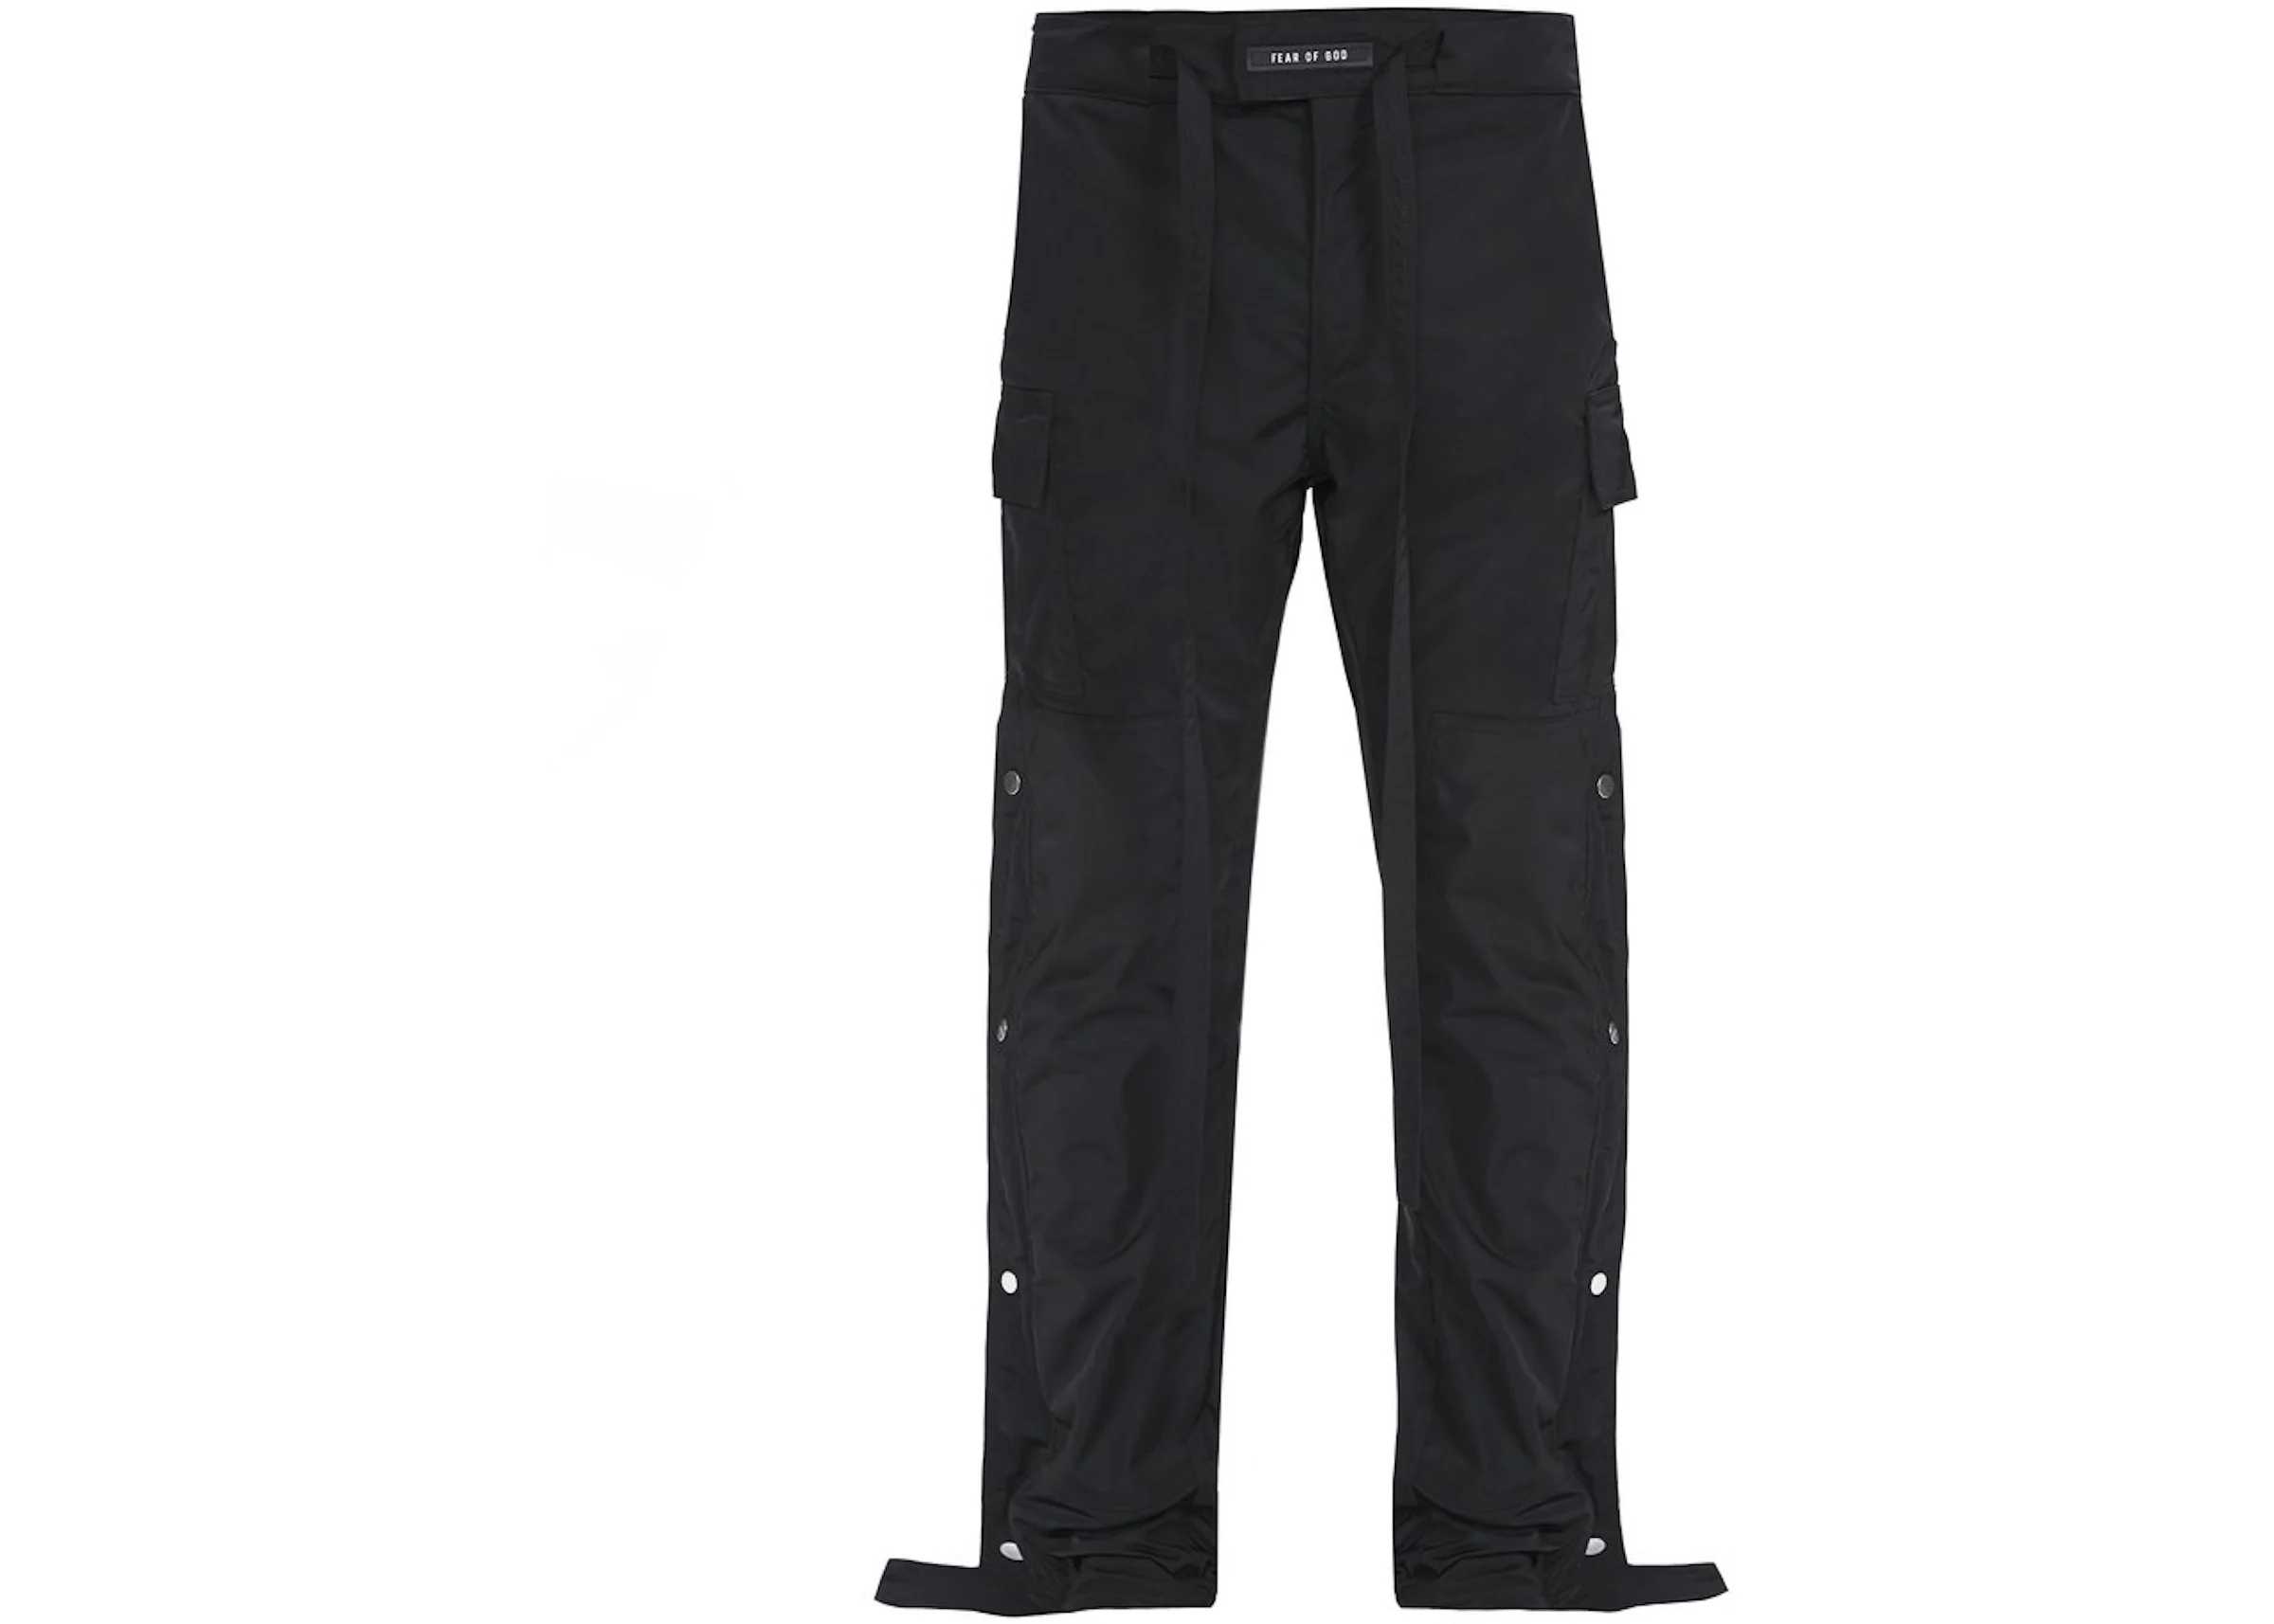 FEAR OF GOD Nylon Cargo Snap Pants Black - Sixth Collection - US